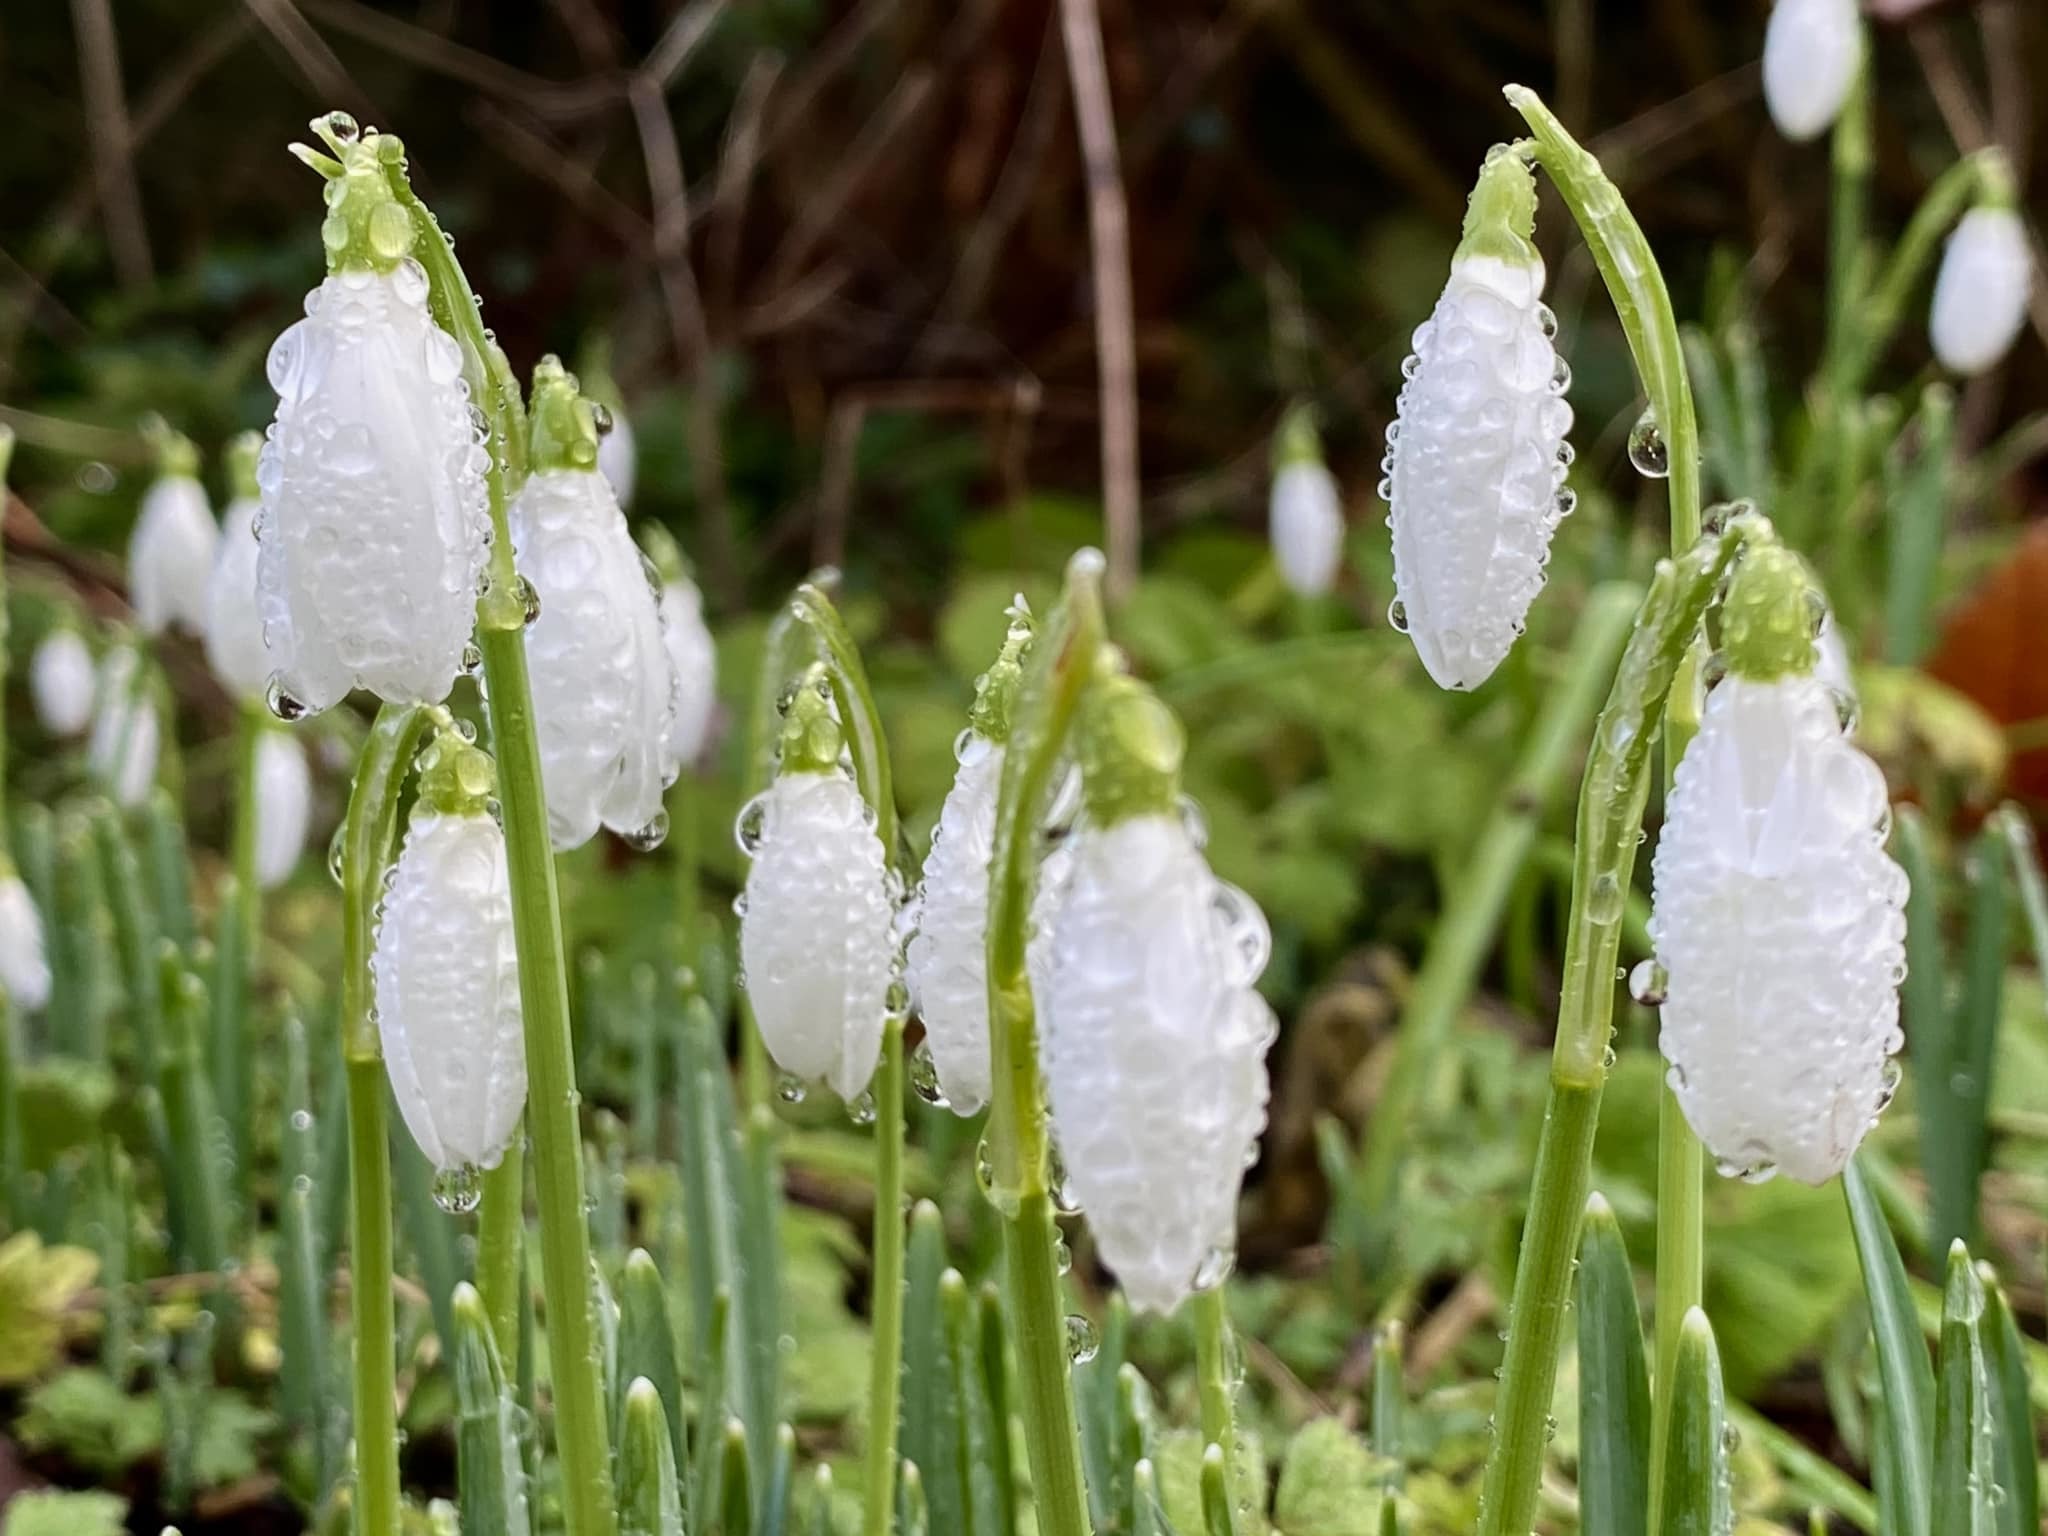 Raindrops on snowdrops by Adele Rugen